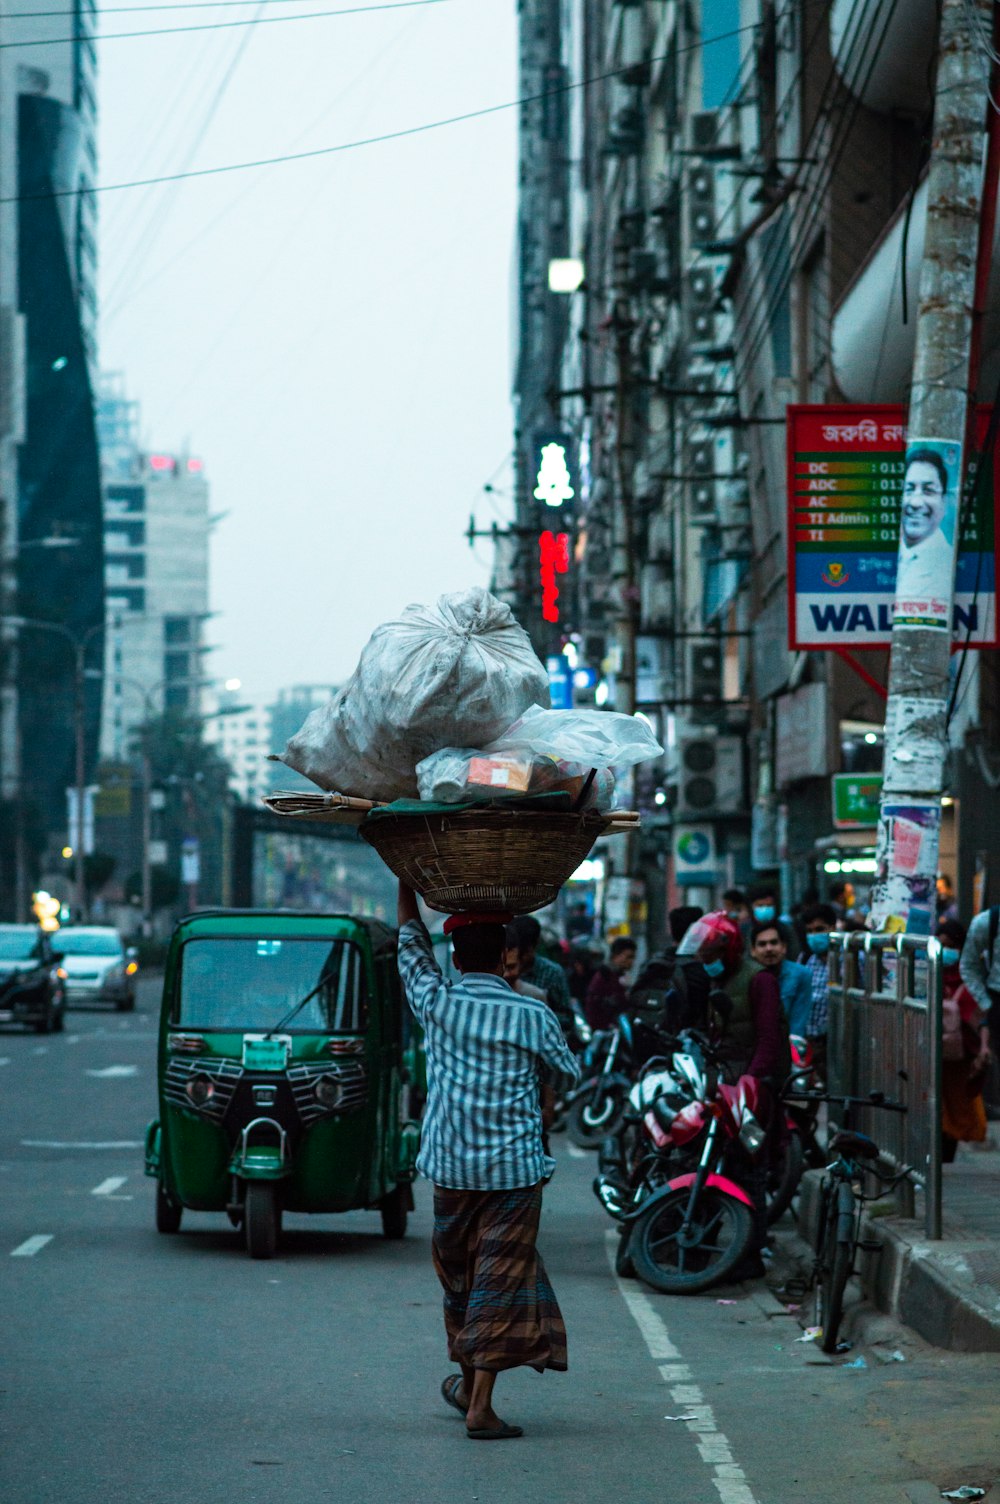 a woman walking down a street carrying a basket on her head